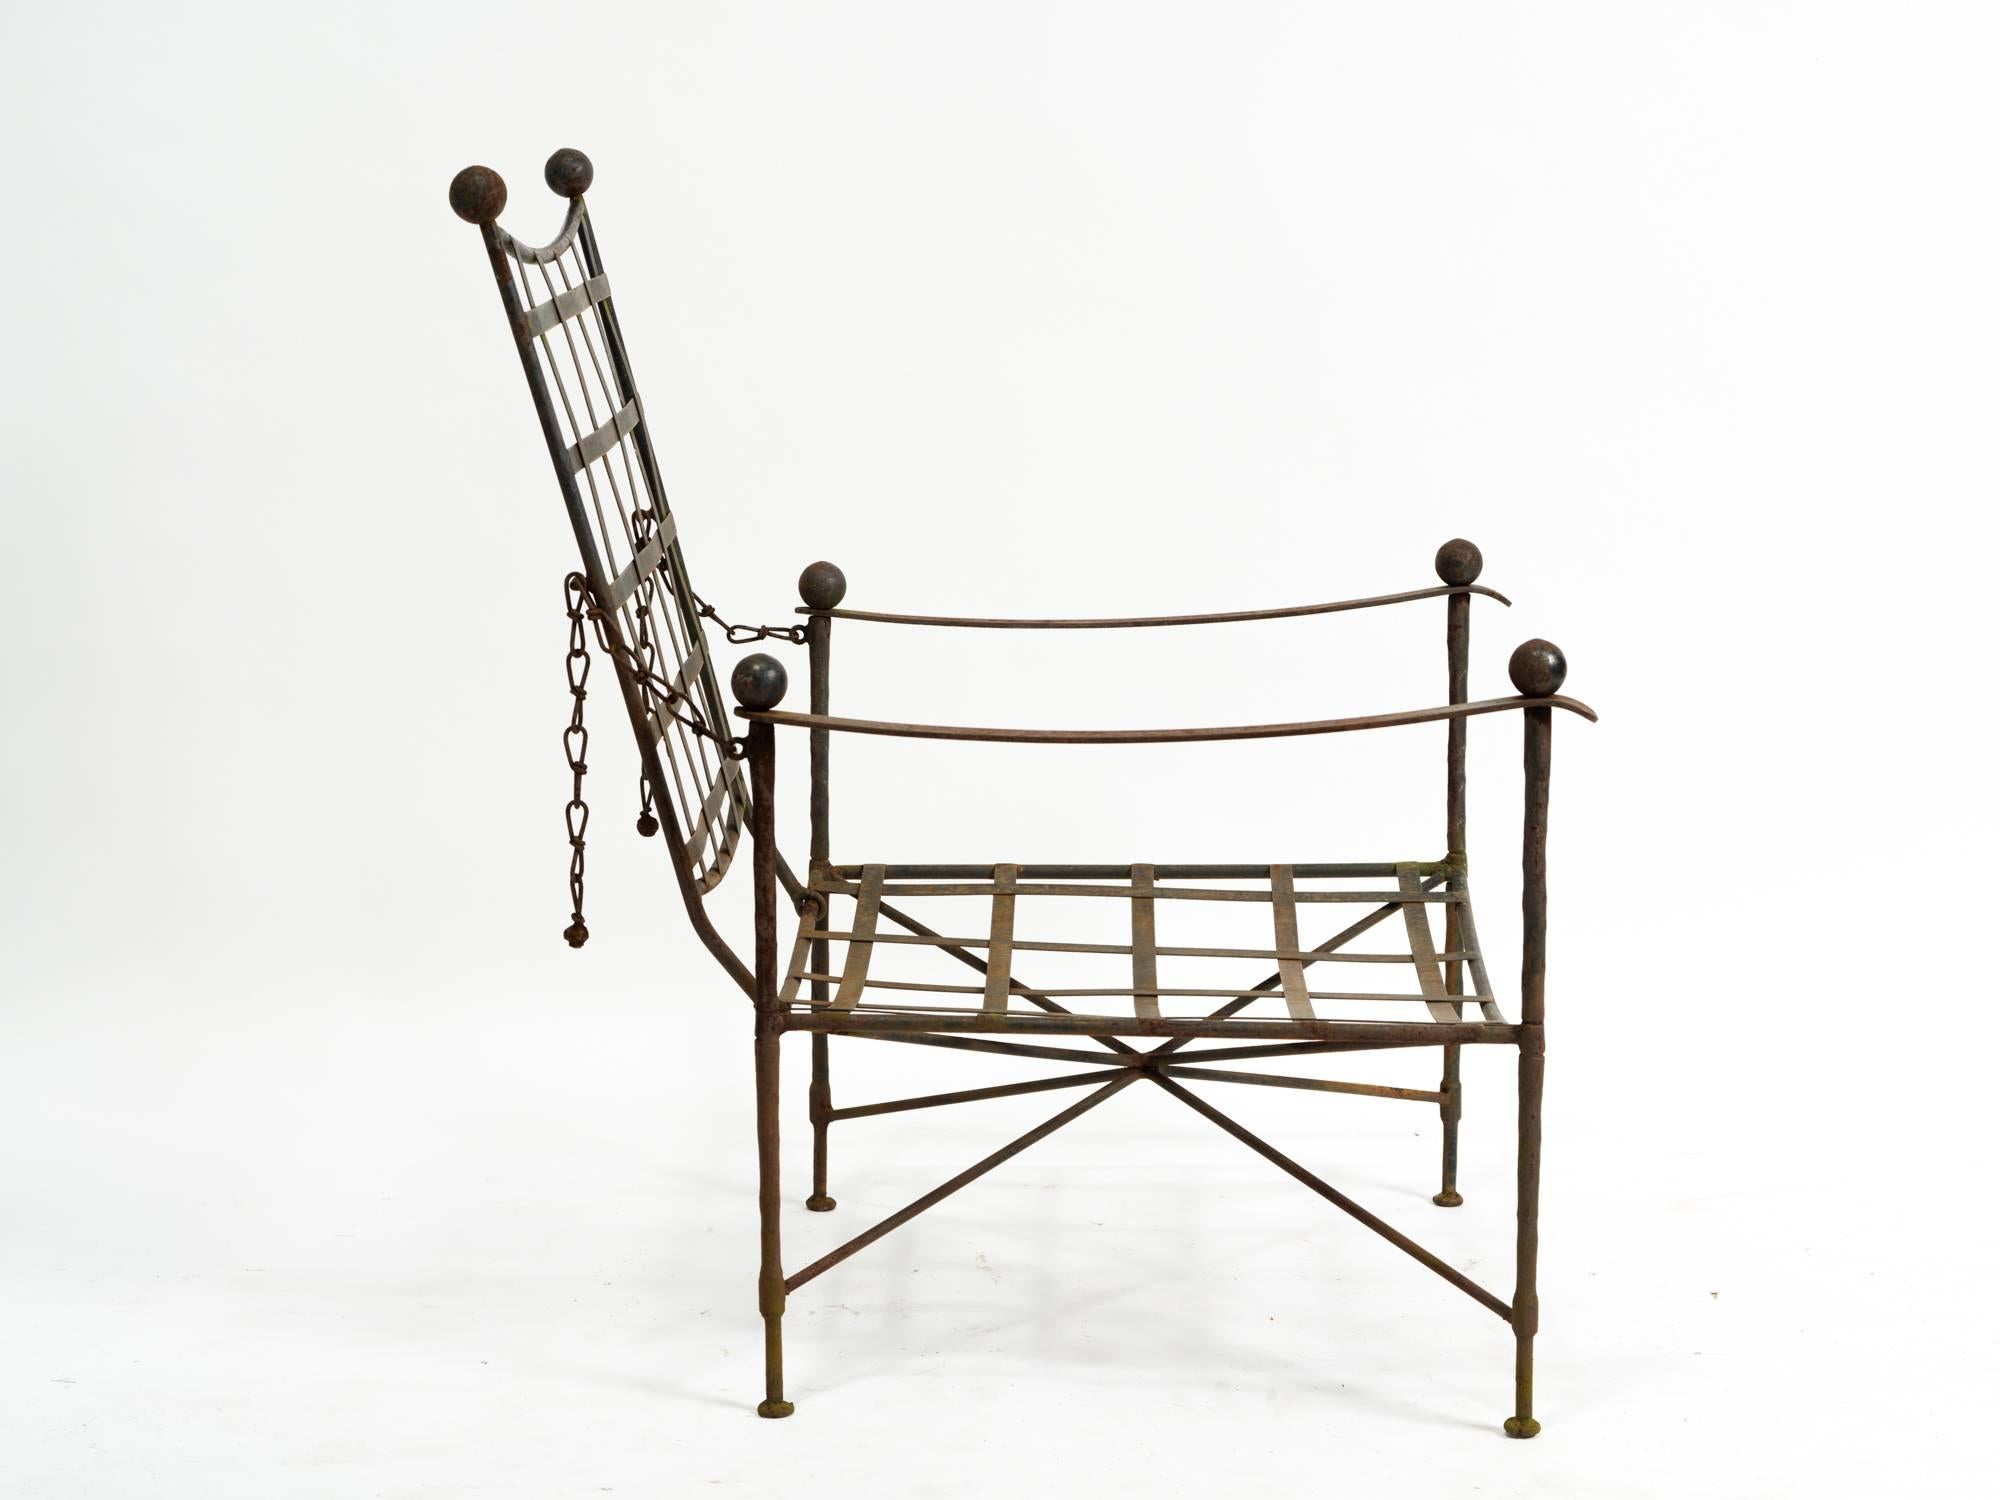 Reclining Mario Papperzini Outdoor Chair for Salterini 1